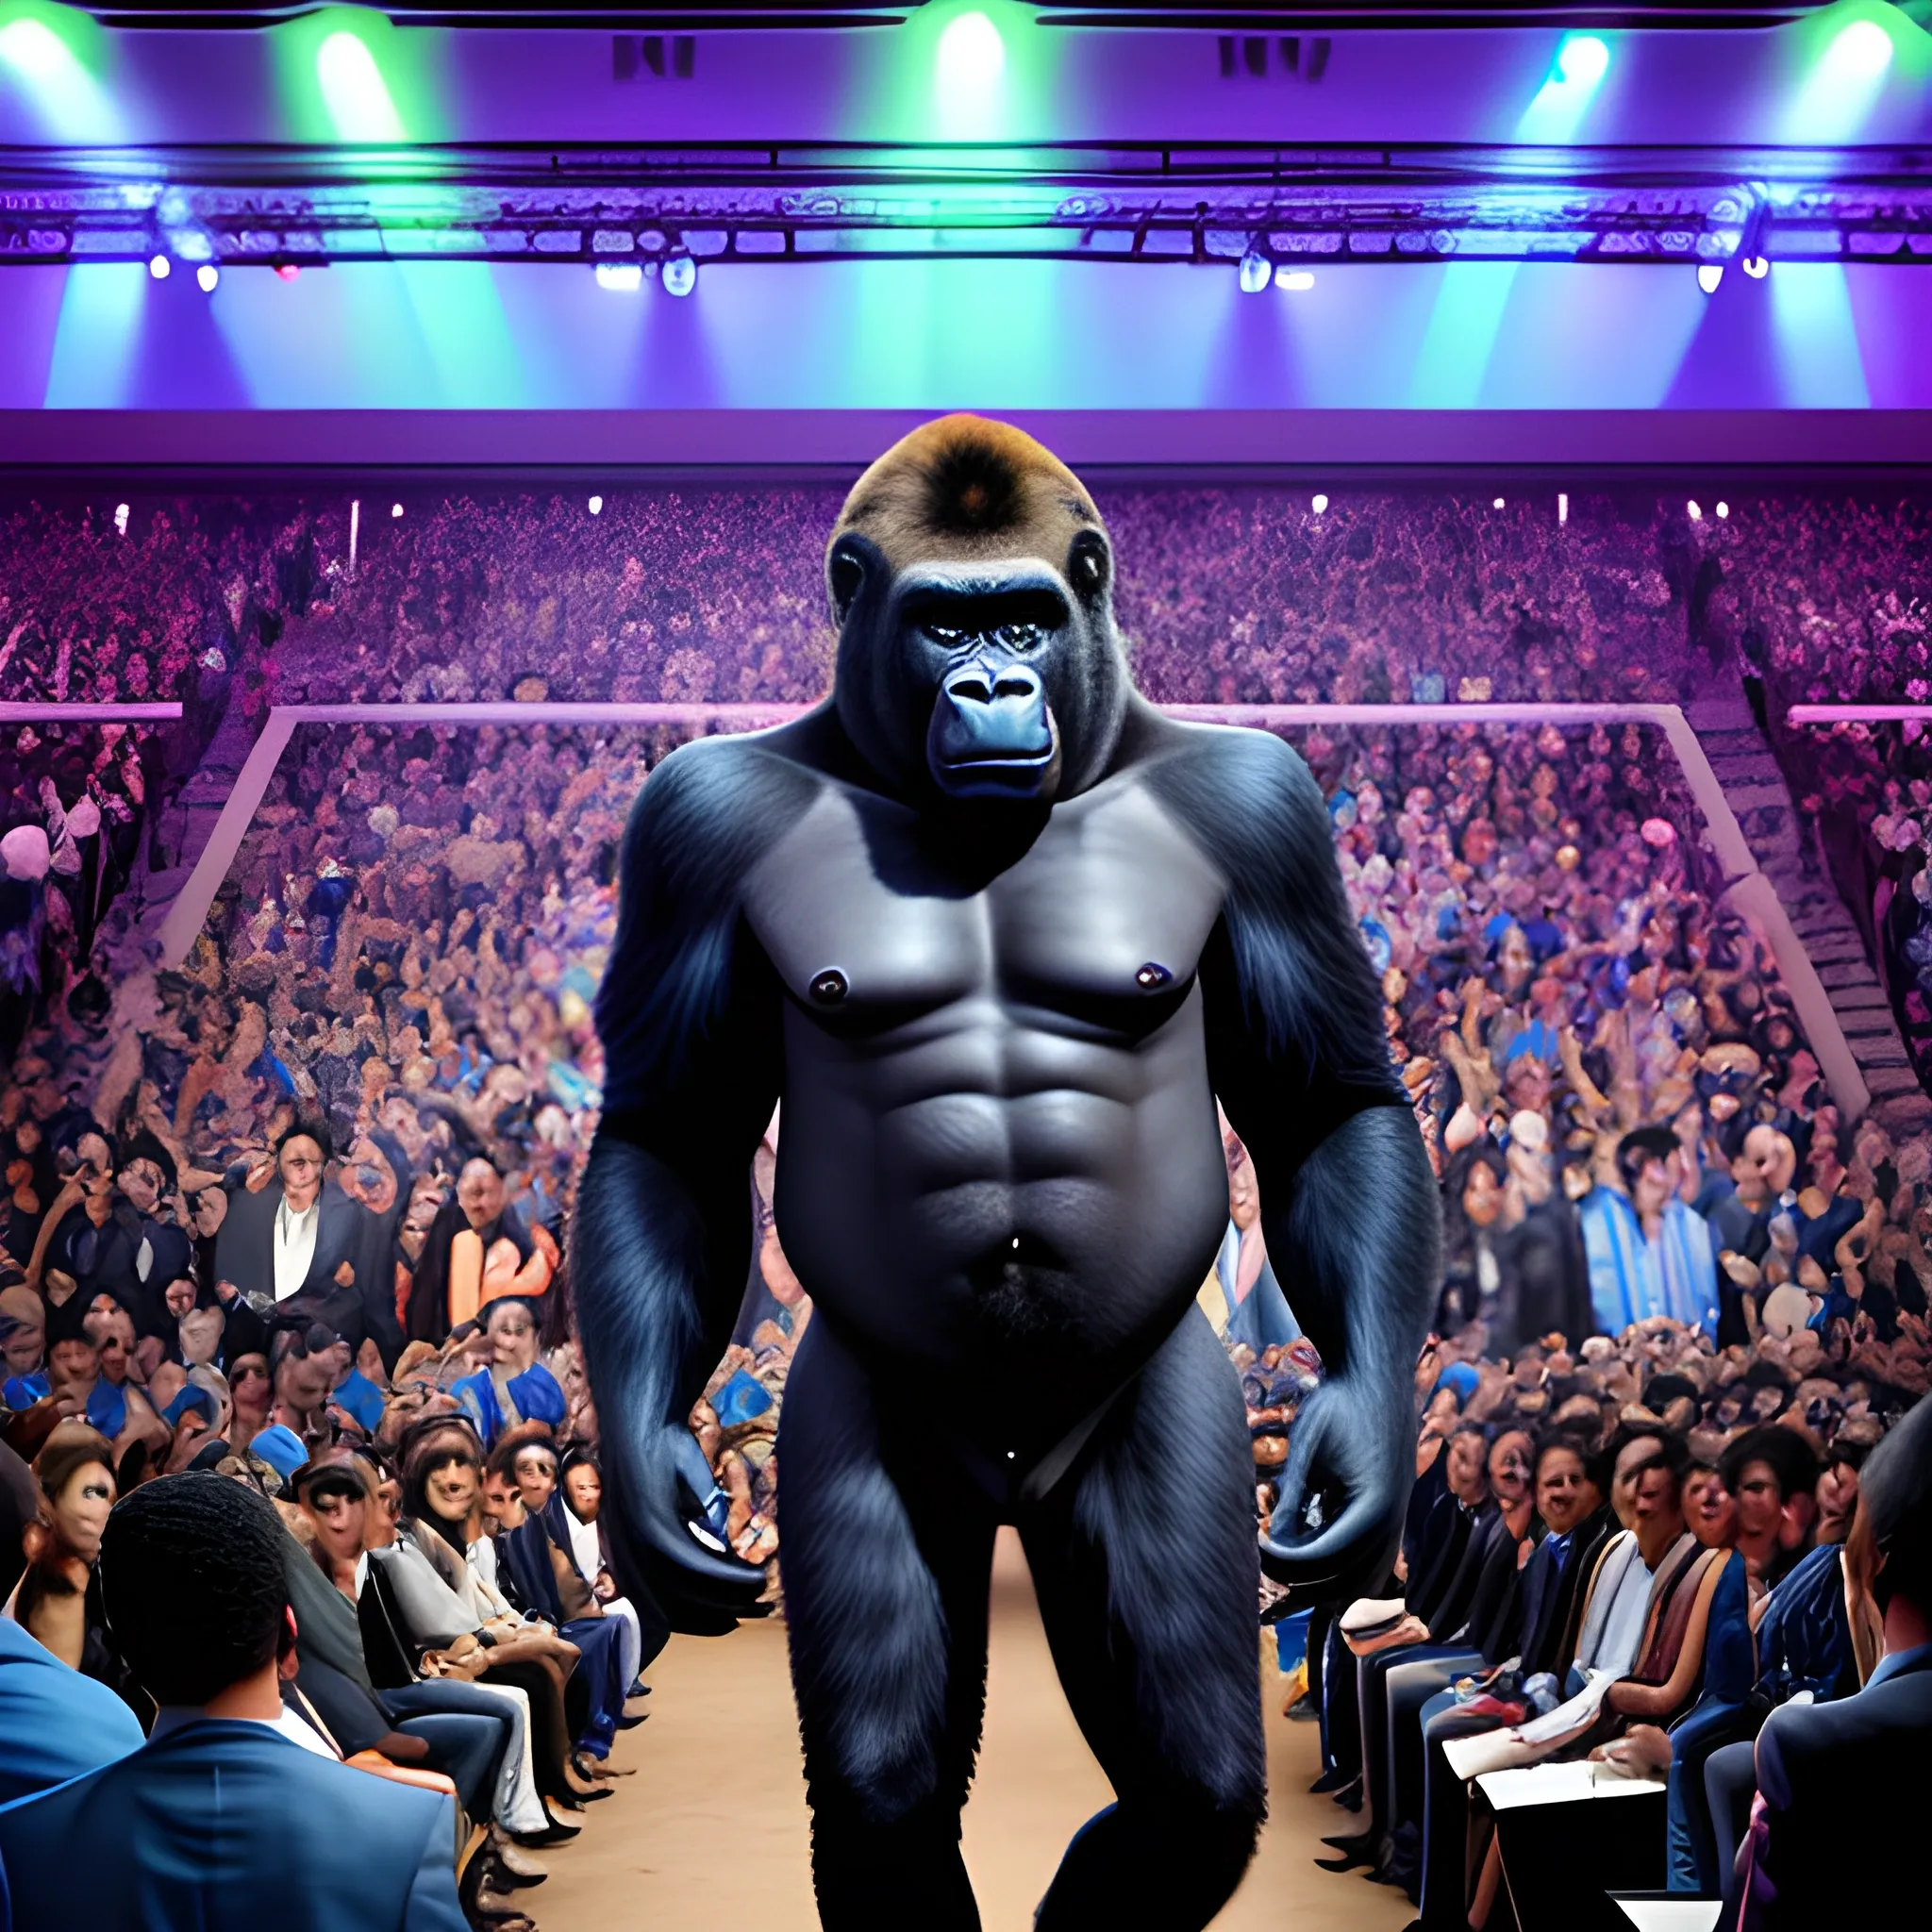 gorilla with tie, a packed show, runway full of people, set of speakers playing, blue lights, Cartoon, baile funk